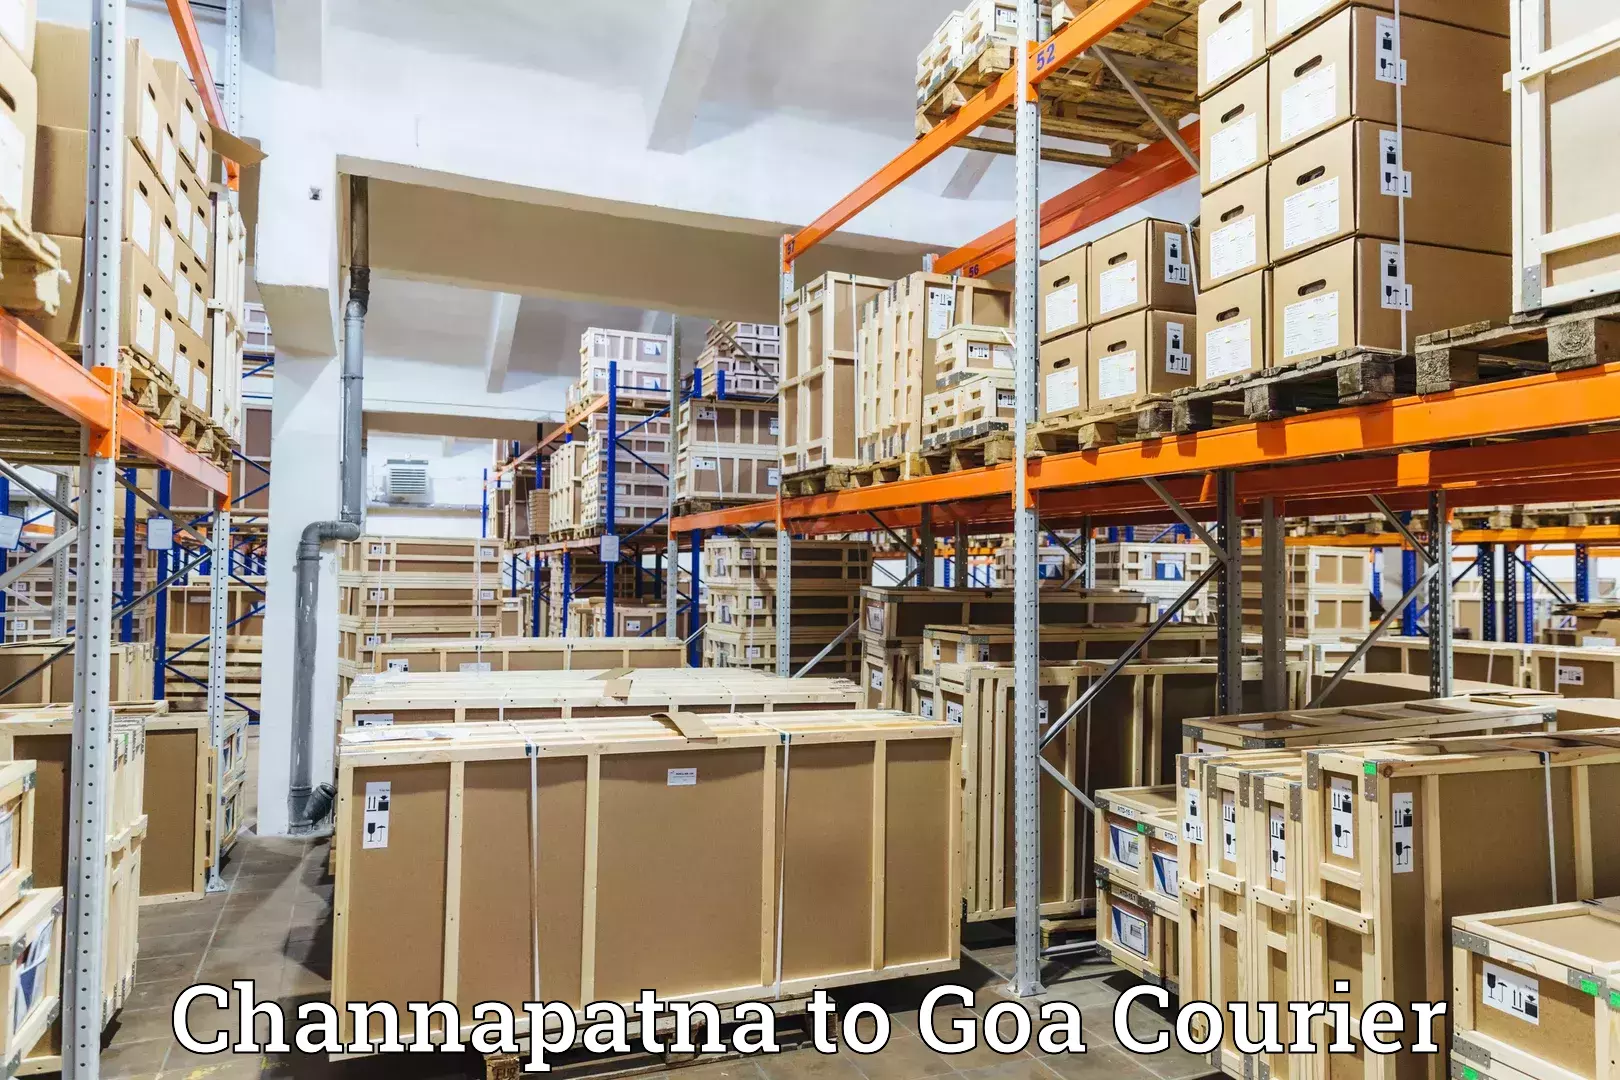 Global courier networks Channapatna to Panaji